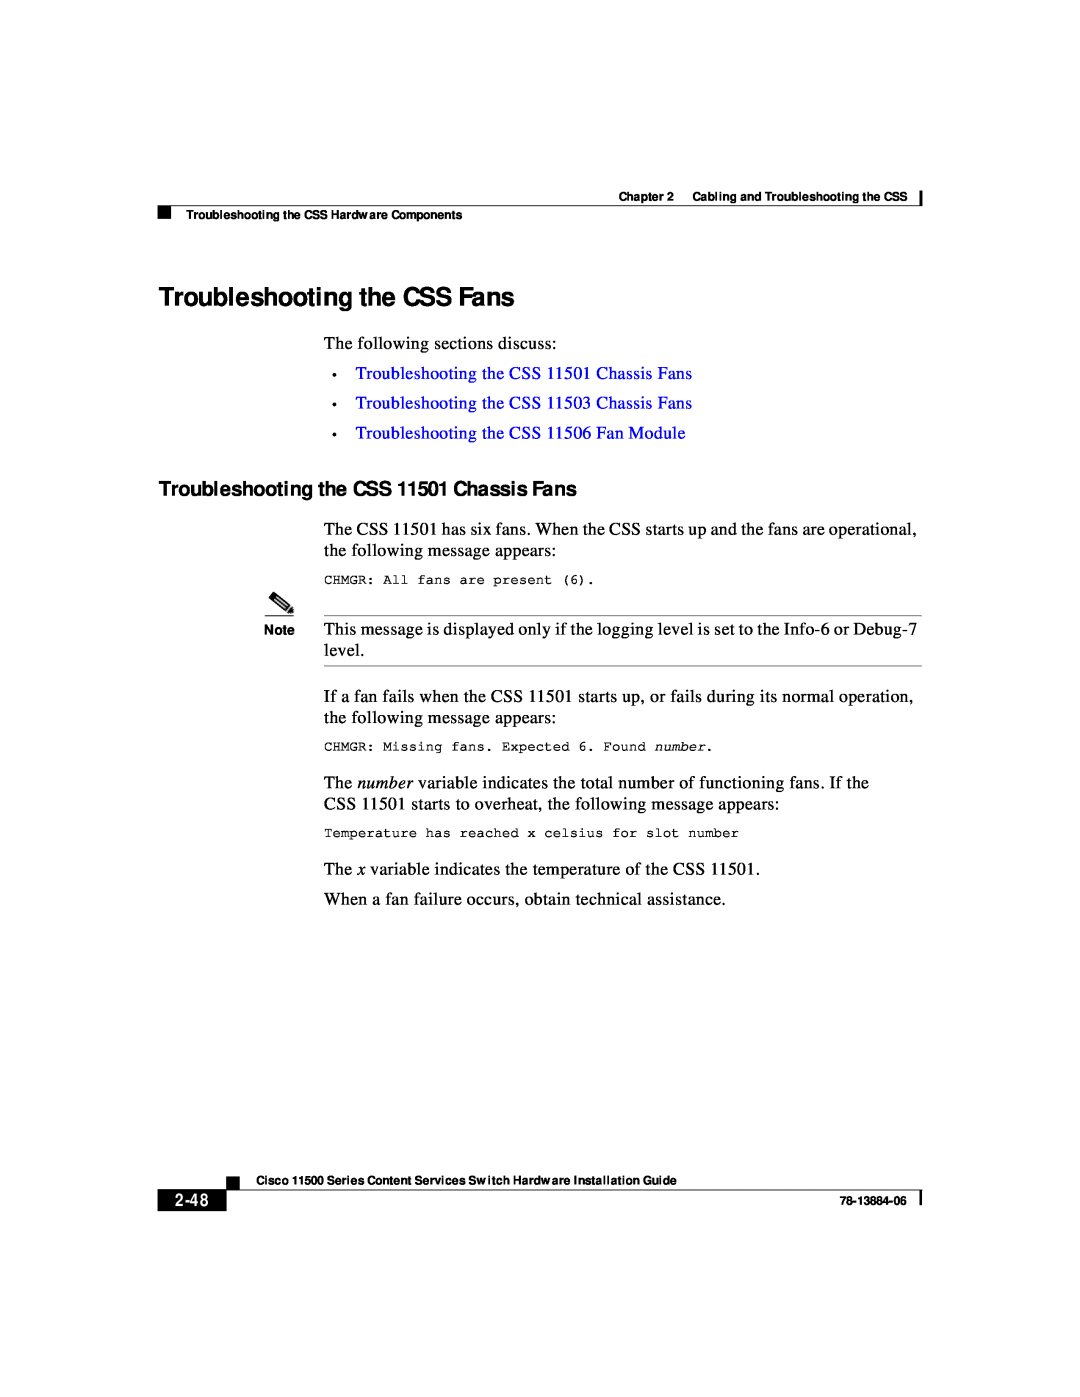 Cisco Systems 11500 Series manual Troubleshooting the CSS Fans, Troubleshooting the CSS 11501 Chassis Fans, 2-48 